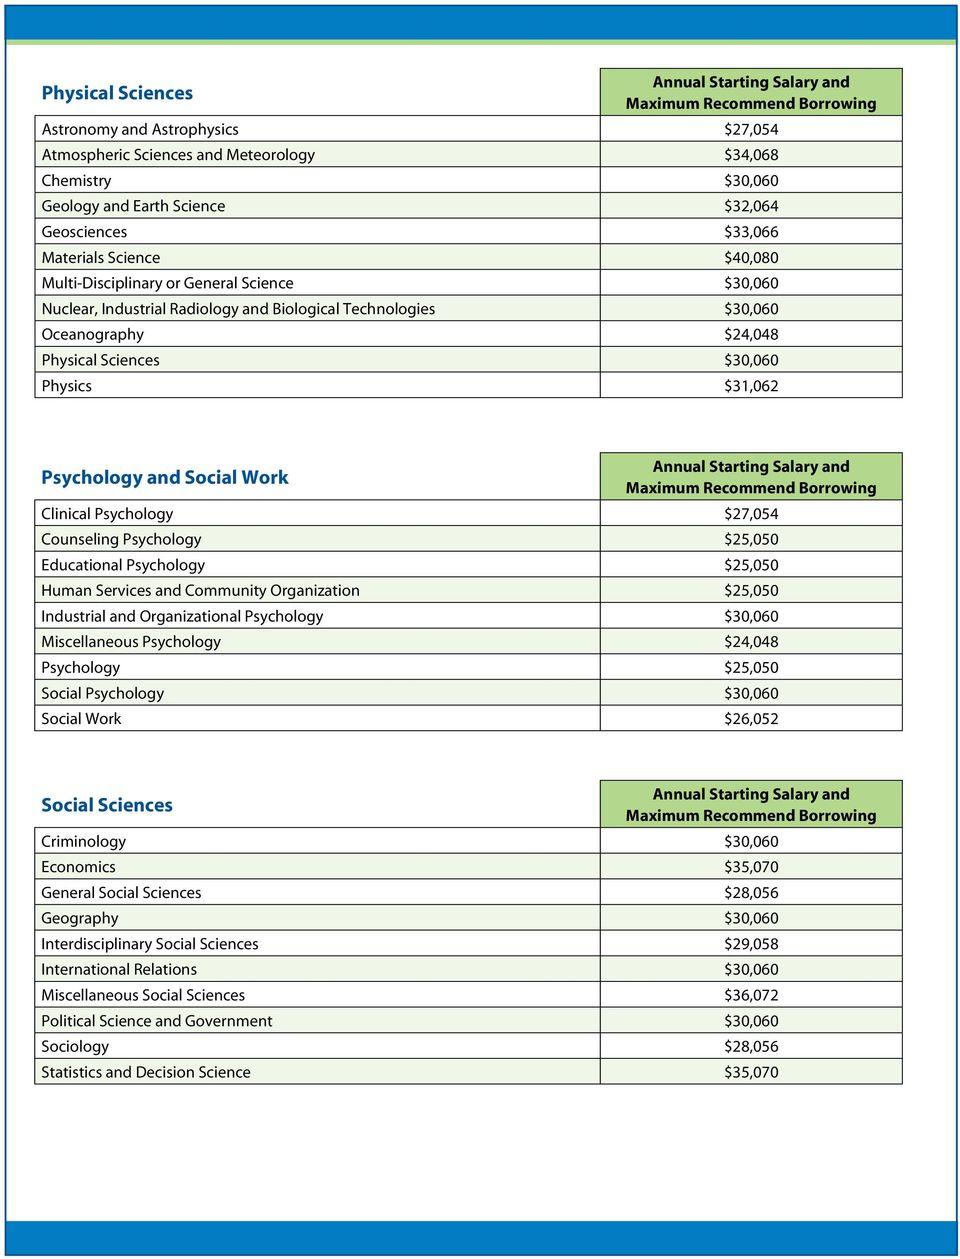 Work Clinical Psychology $27,054 Counseling Psychology $25,050 Educational Psychology $25,050 Human Services and Community Organization $25,050 Industrial and Organizational Psychology $30,060